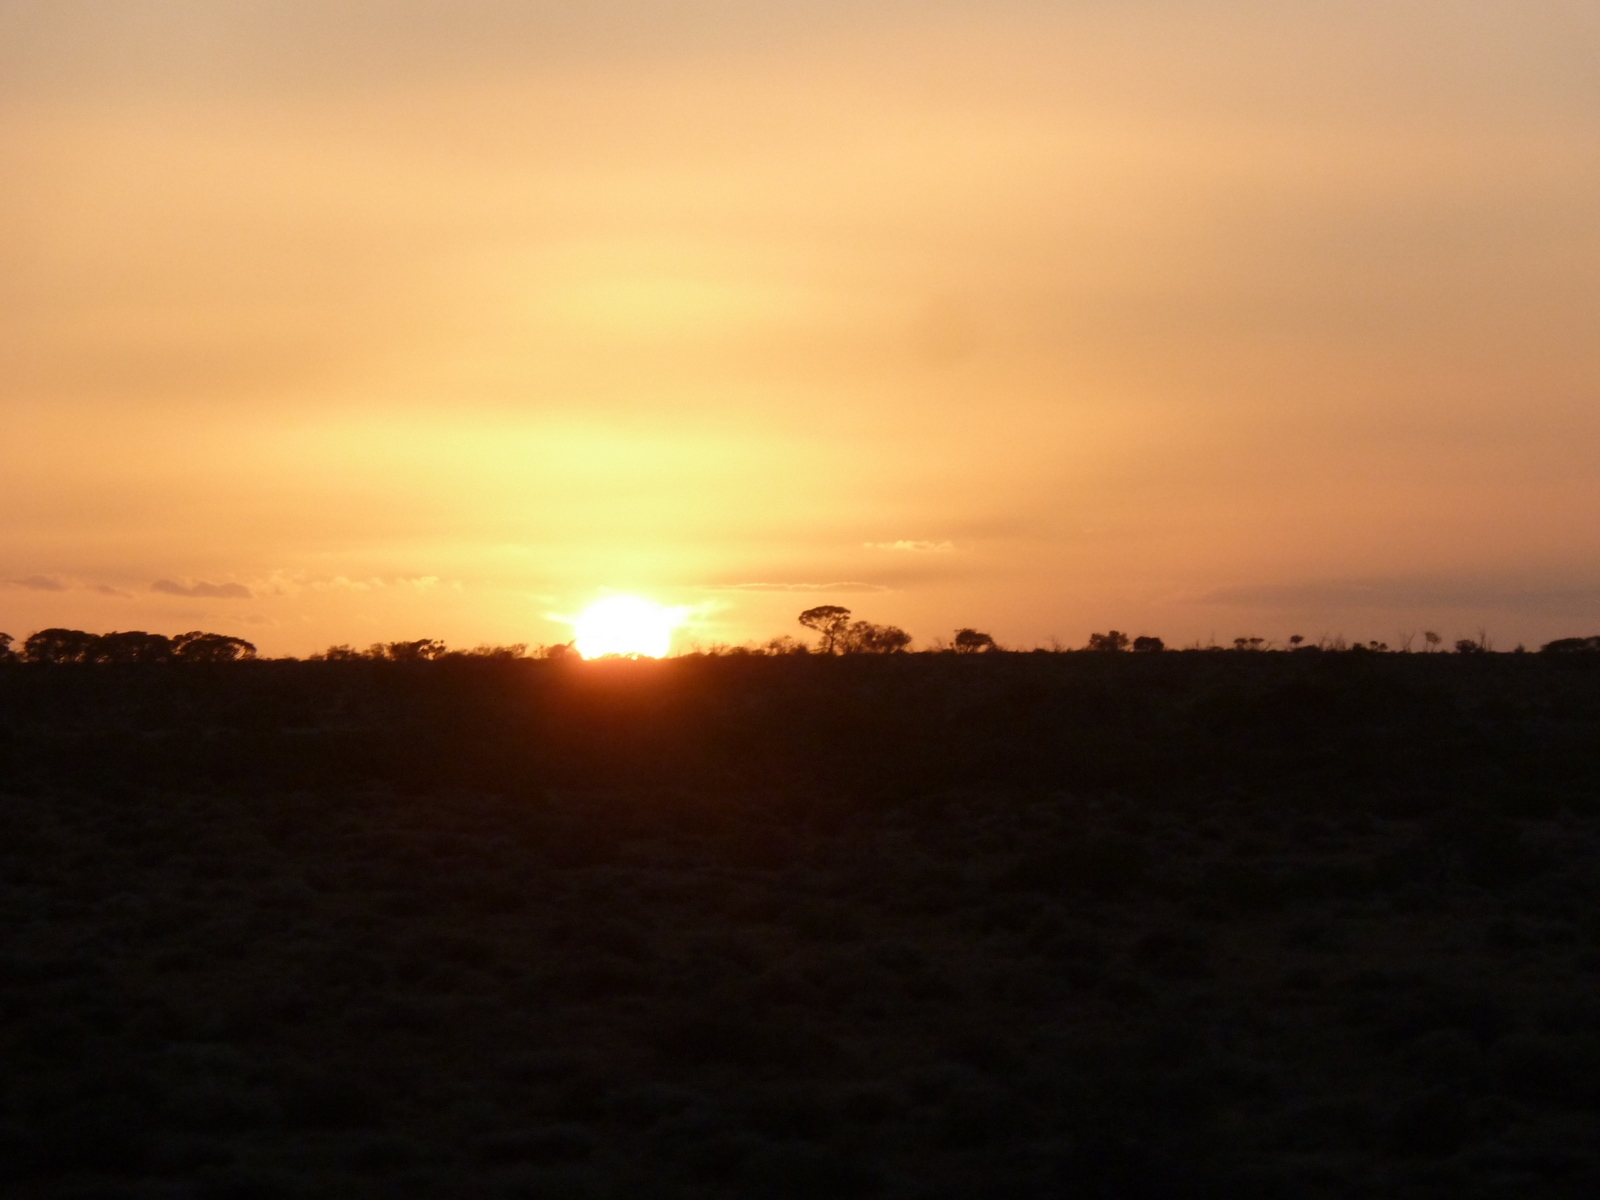 Sunset on the ghan low